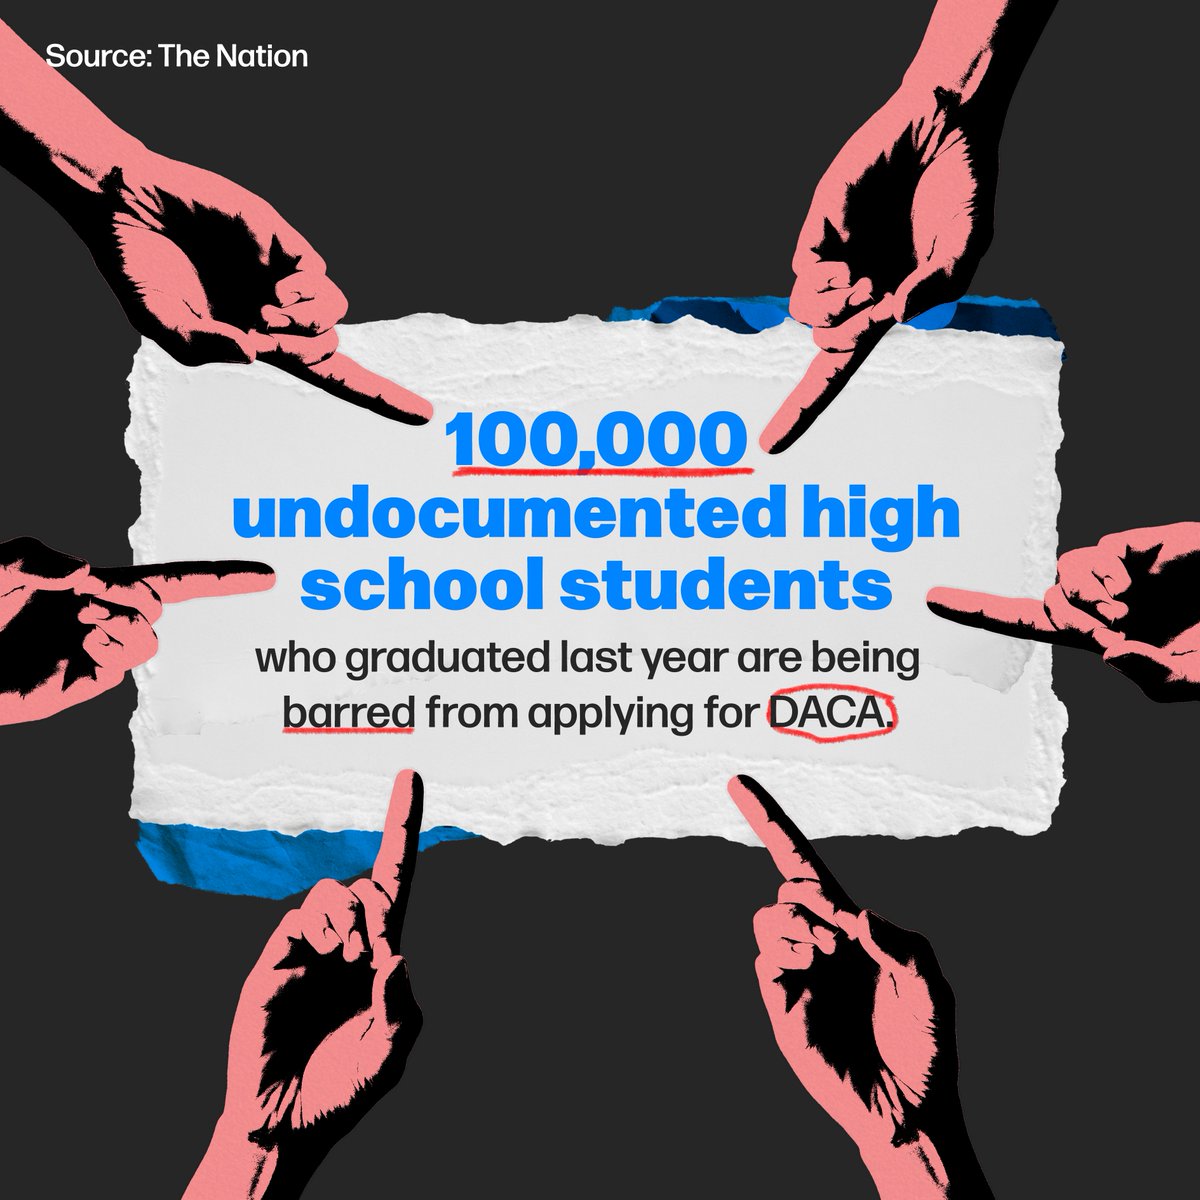 Nearly 100,000 undocumented students who graduated from high school last year can't apply for DACA. This unjust situation limits their ability to work, contribute to the economy, & participate in their communities. It's time for barriers to DACA to be lifted.